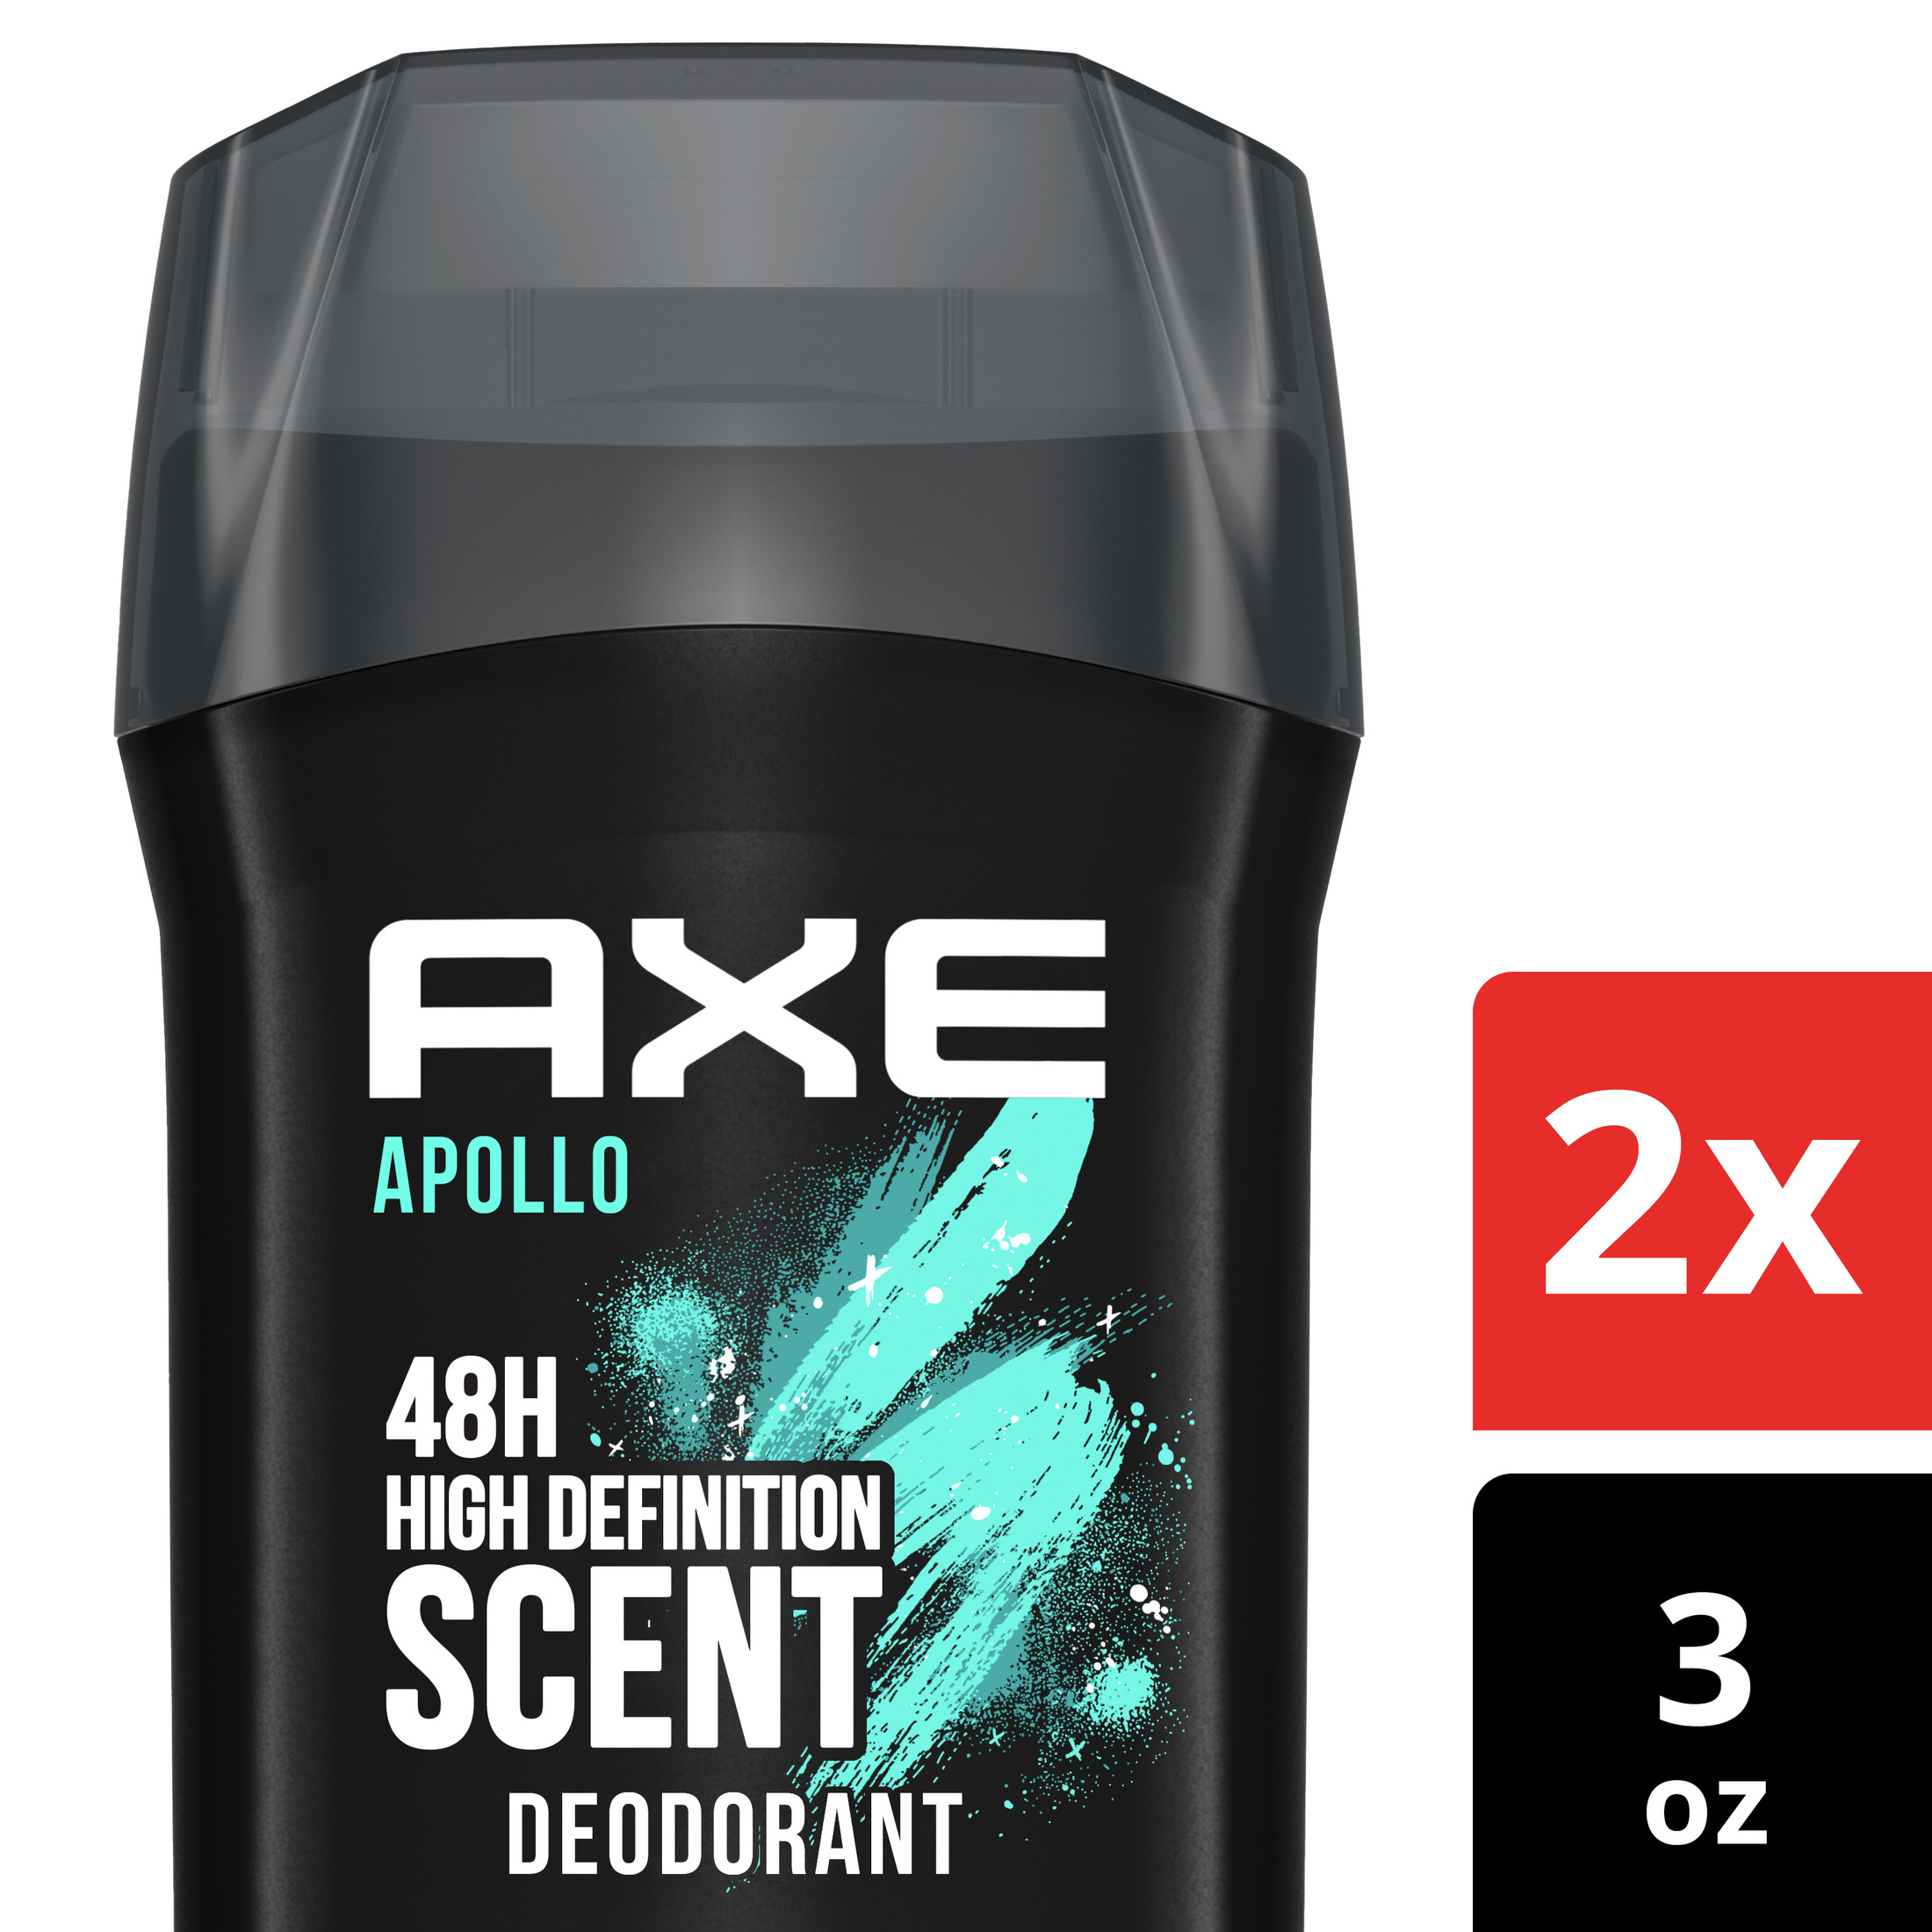 Axe Apollo Long Lasting Men's Deodorant Stick Twin Pack, Sage and Cedarwood, 3 oz - image 3 of 11